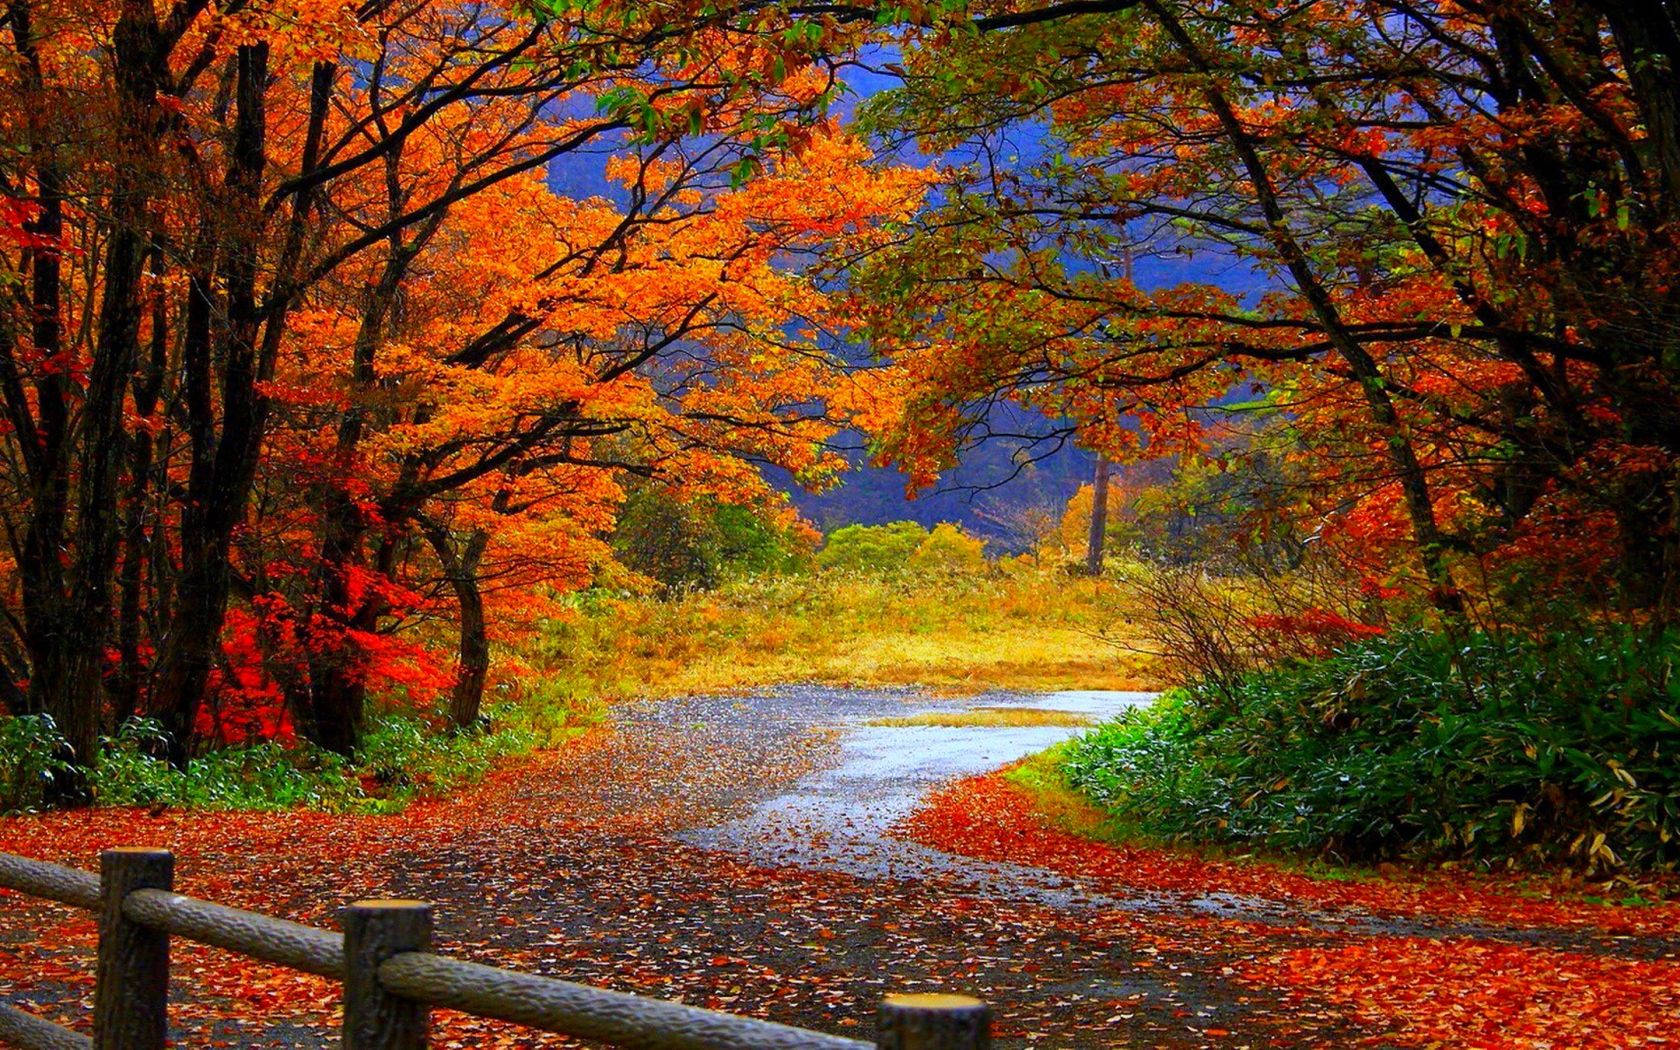 Take a breathtaking walk down the country road during fall Wallpaper